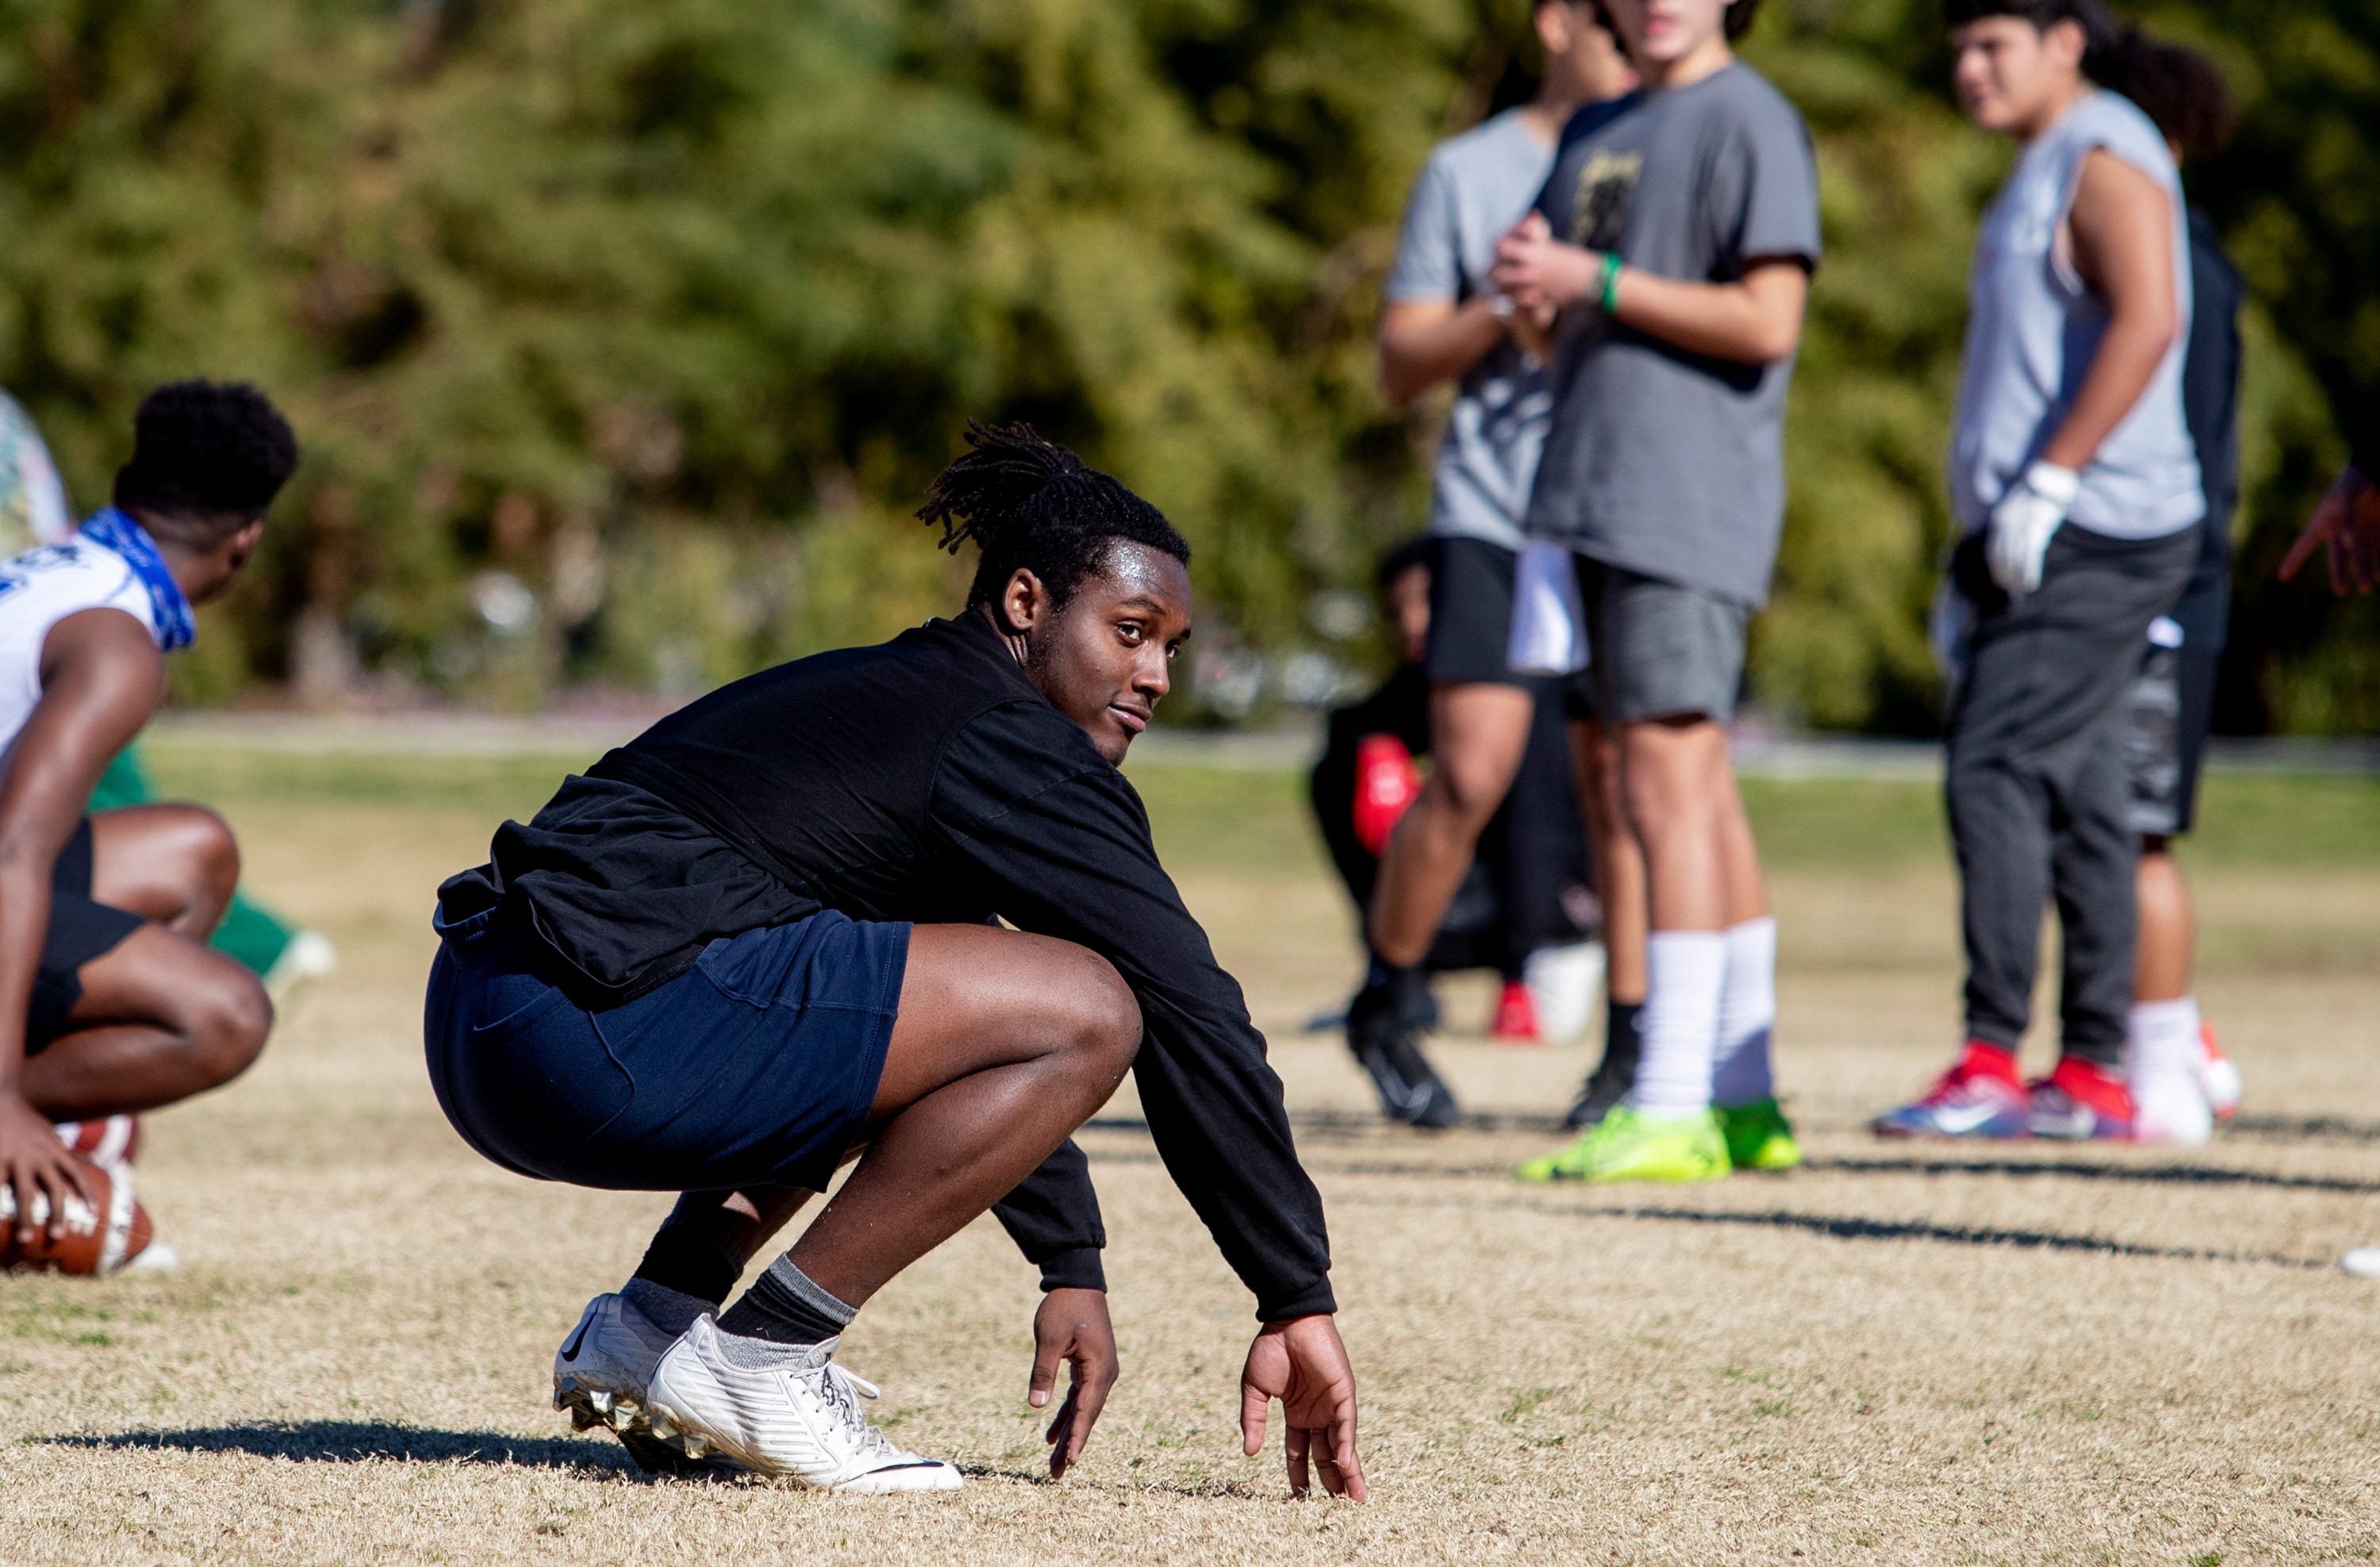 Arieon Capler readies himself for the next play during tryouts for the Desert Diablos club football team at La Quinta Park in La Quinta, Calif., on January 30, 2021. 